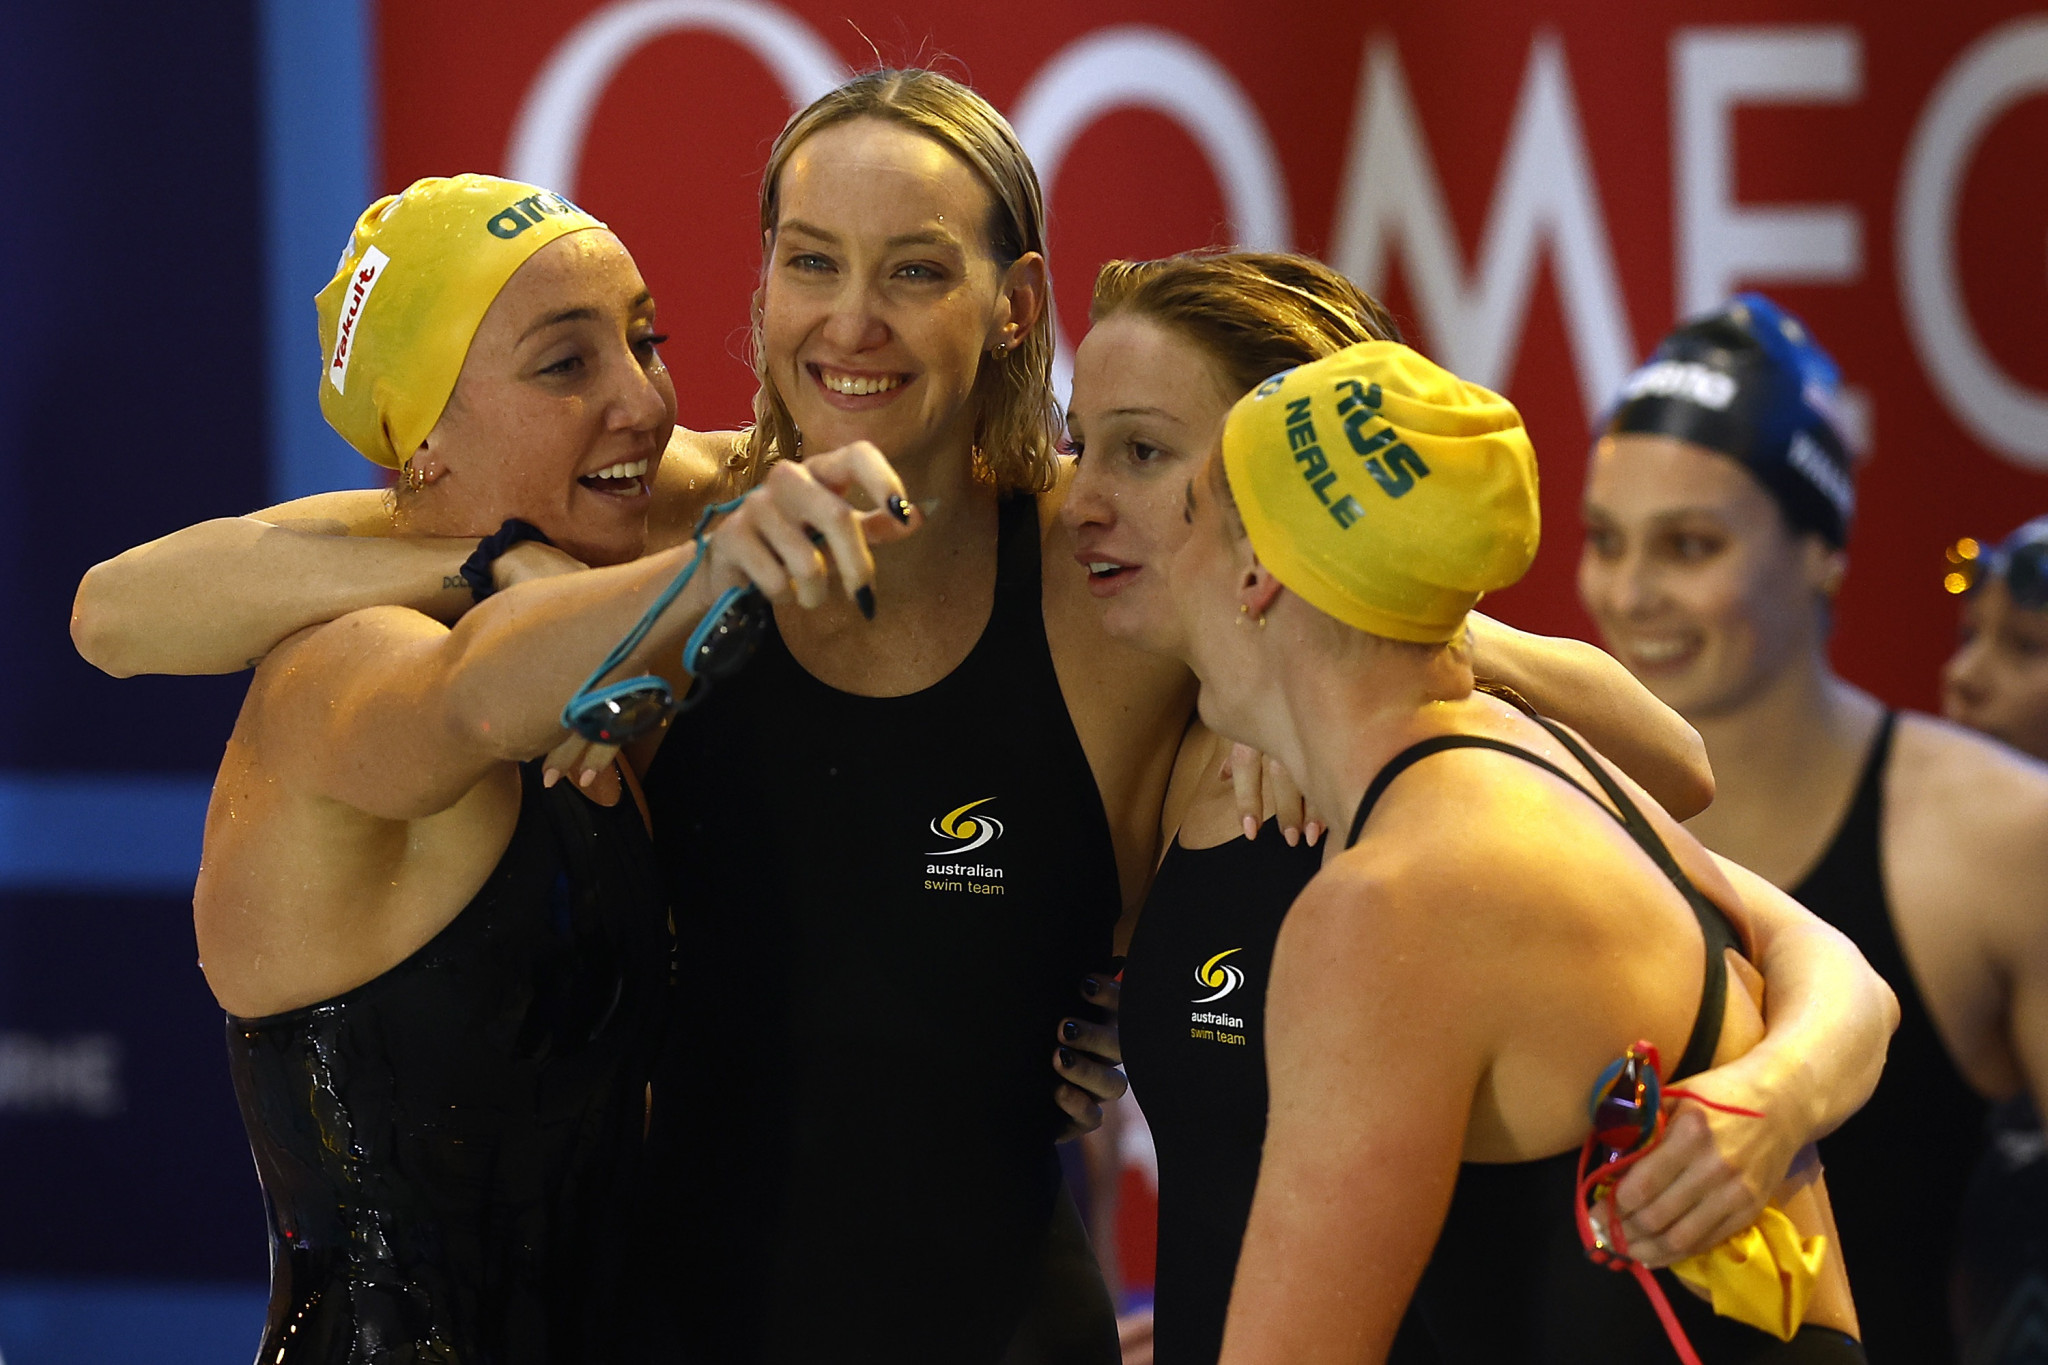 Australia broke the women’s 4x200m freestyle relay world record by almost two seconds ©Getty Images